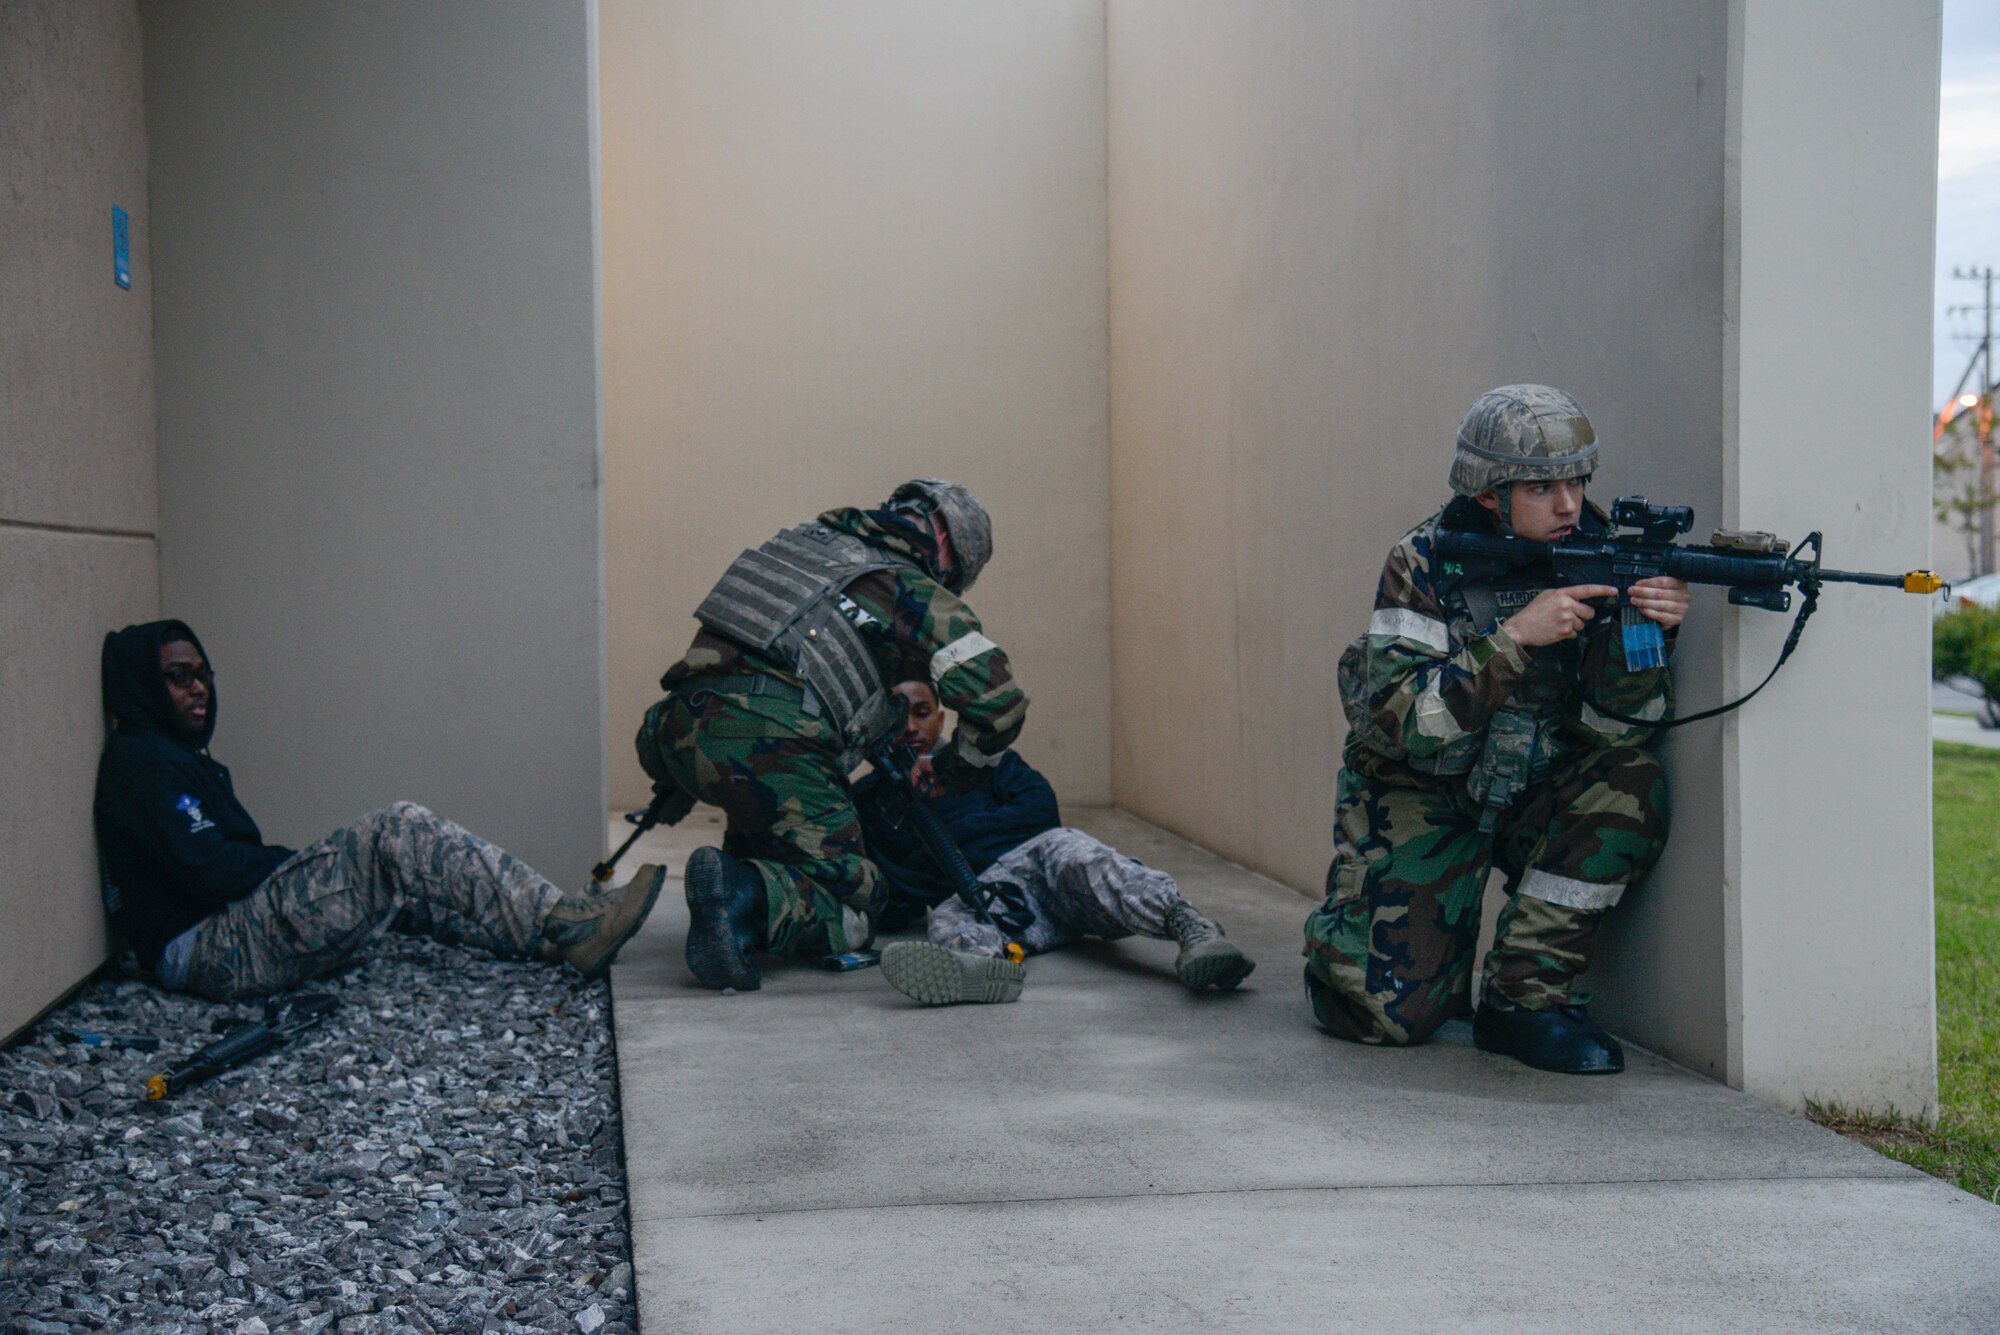 Fire team members from the 51st Security Forces Squadron immobilize simulated intruders during an opposing forces scenario for Beverly Herd 16-01 May 10, 2016, at Osan Air Base, Republic of Korea. BH 16-01 is a week-long readiness exercise for the 51st FW which includes a plethora of scenarios like Chemical, Biological, Radioactive, and Nuclear response, active shooter and opposing forces. (U.S. Air Force photo by Senior Airman Dillian Bamman/Released)